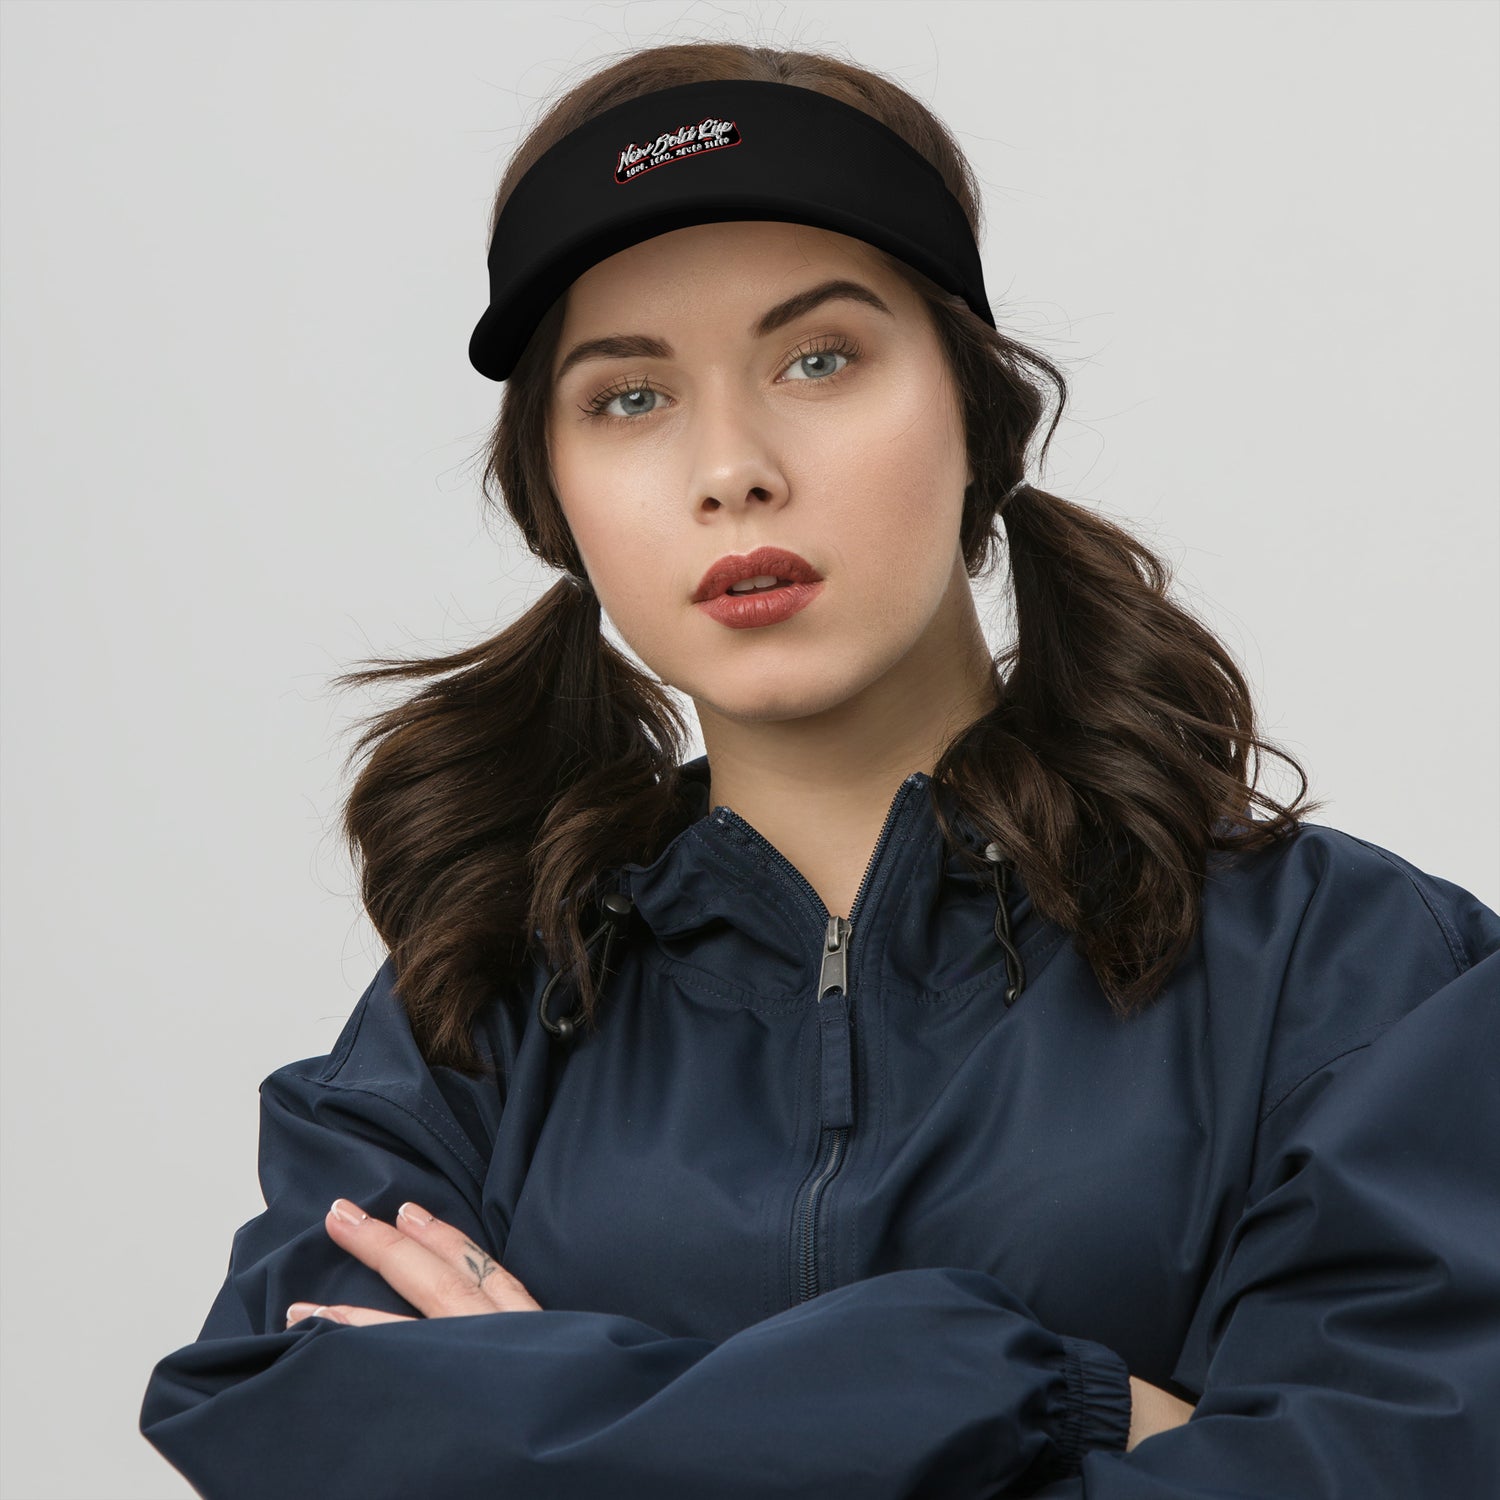 Image of a model wearing New Bold Life Visor - Hats. the hat is black with the Newboldlife logo on the front.